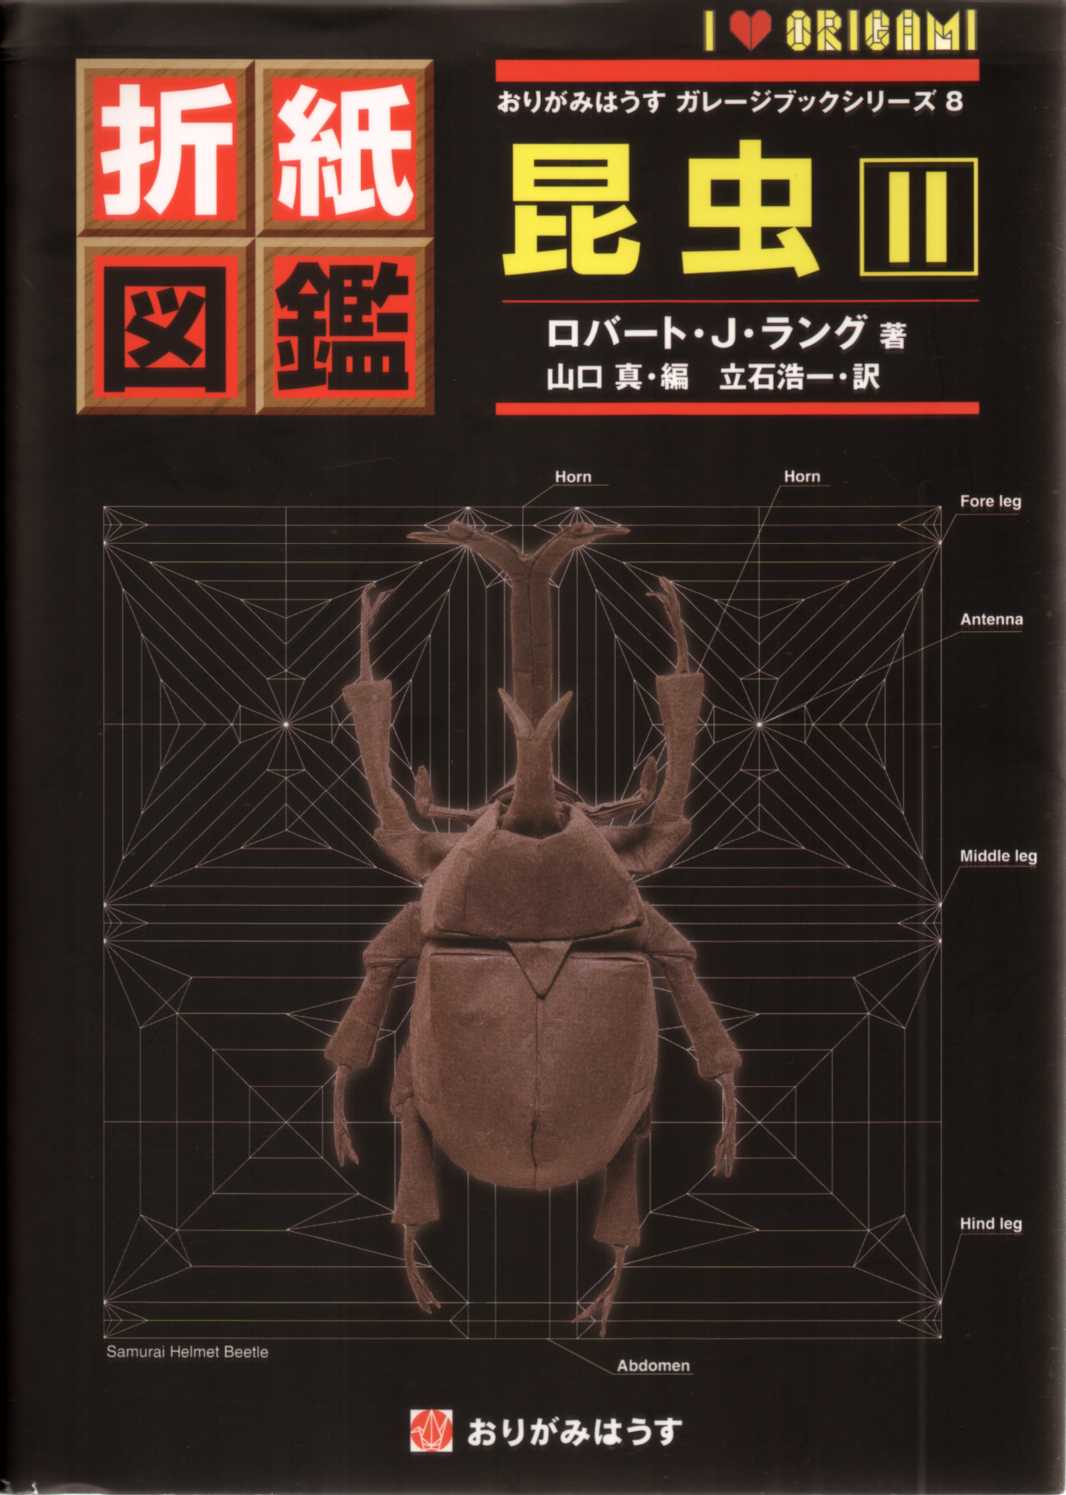 Origami Insects II / 折紙図鑑　昆虫・2 : page 107.